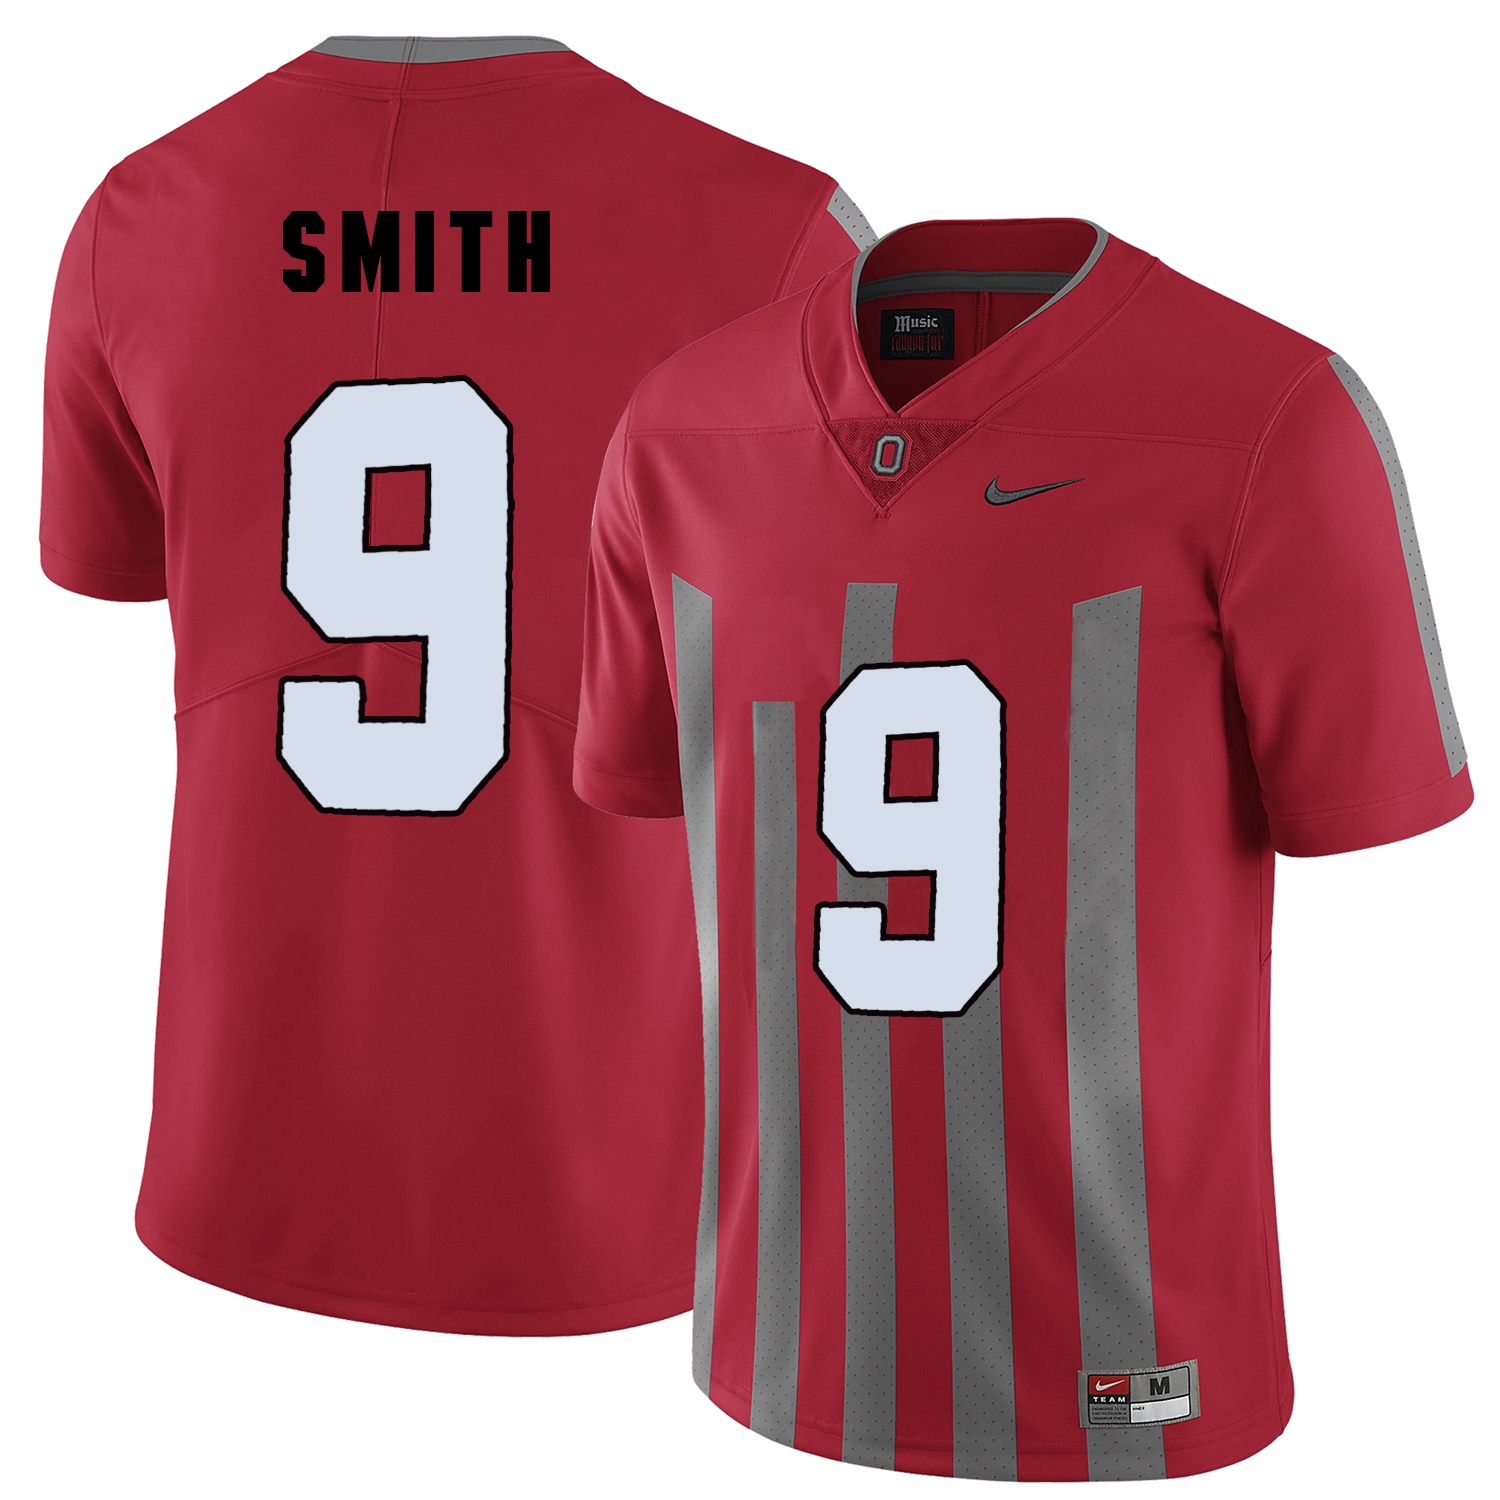 Ohio State Buckeyes Men's NCAA Devin Smith #9 Red Elite College Football Jersey HBV8749SY